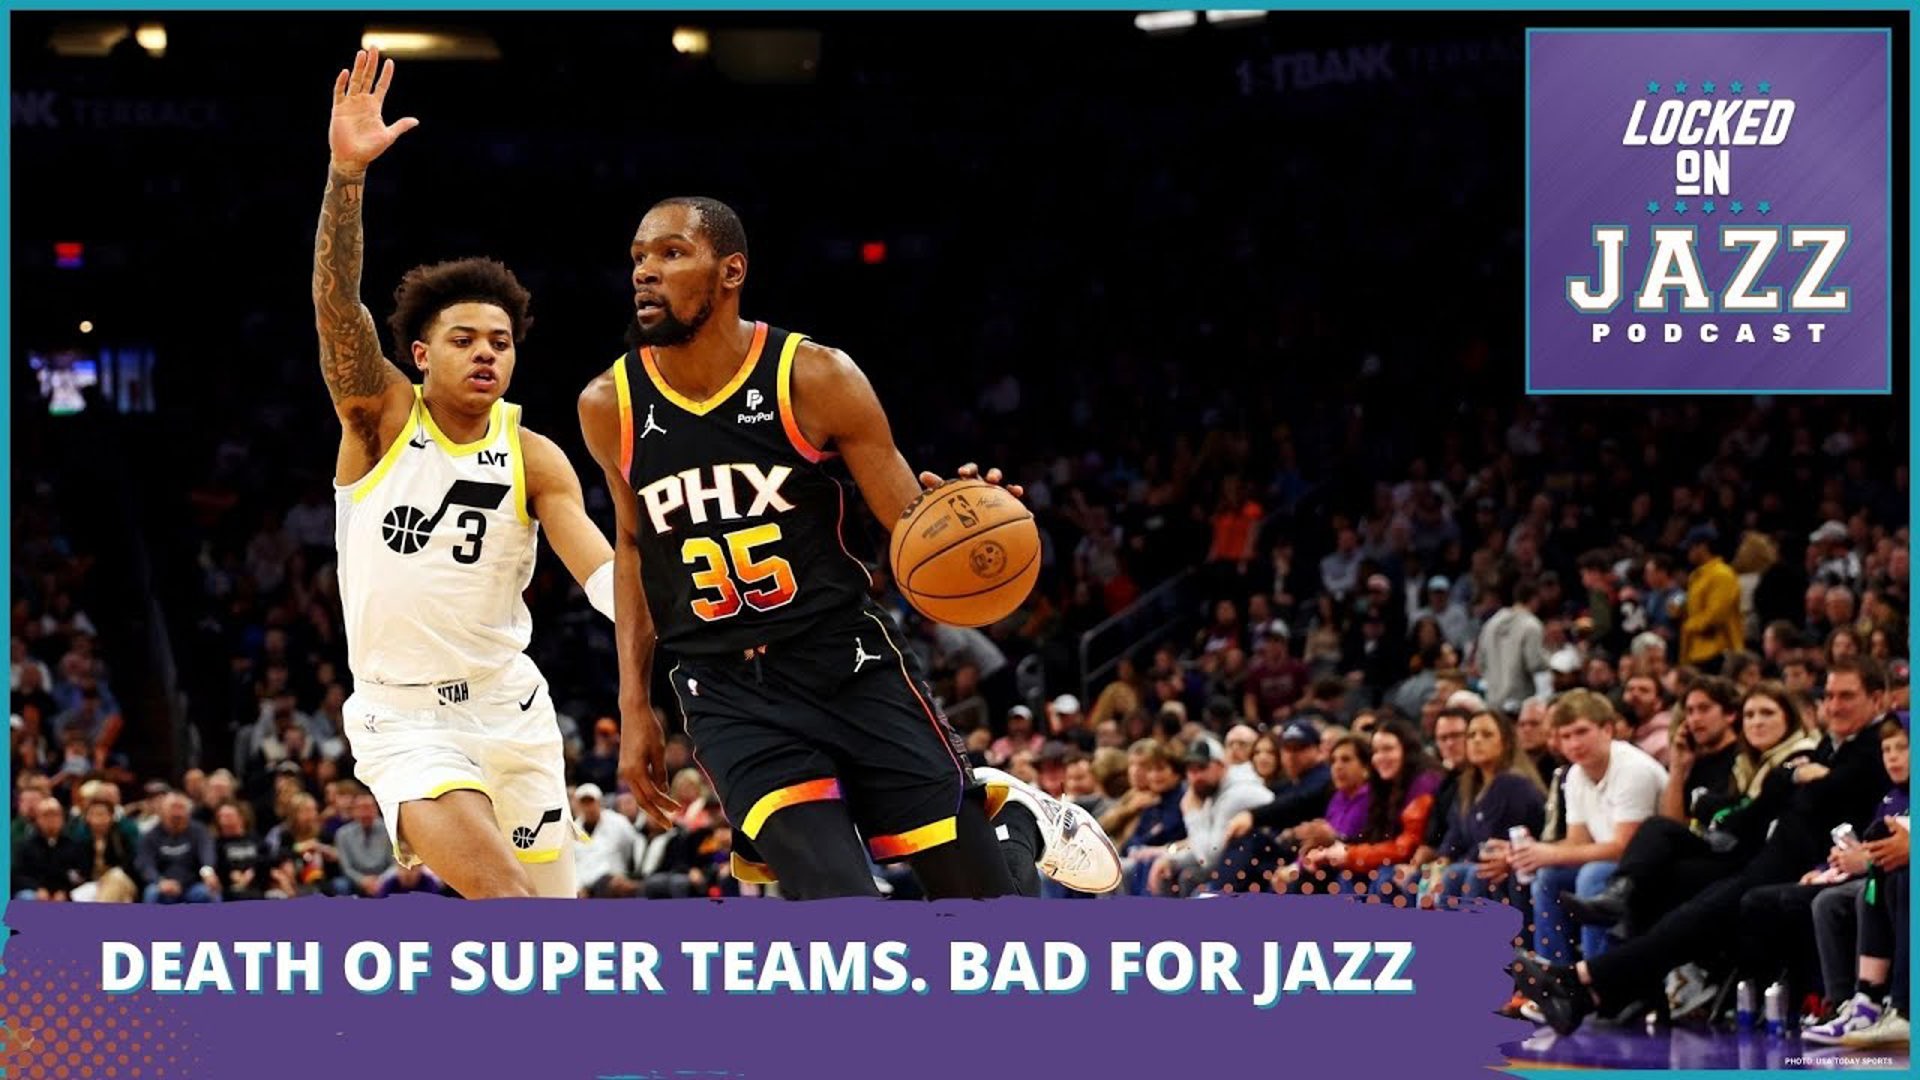 The Phoenix Suns might be the death of the super team as they flame out in the first round of the NBA playoffs